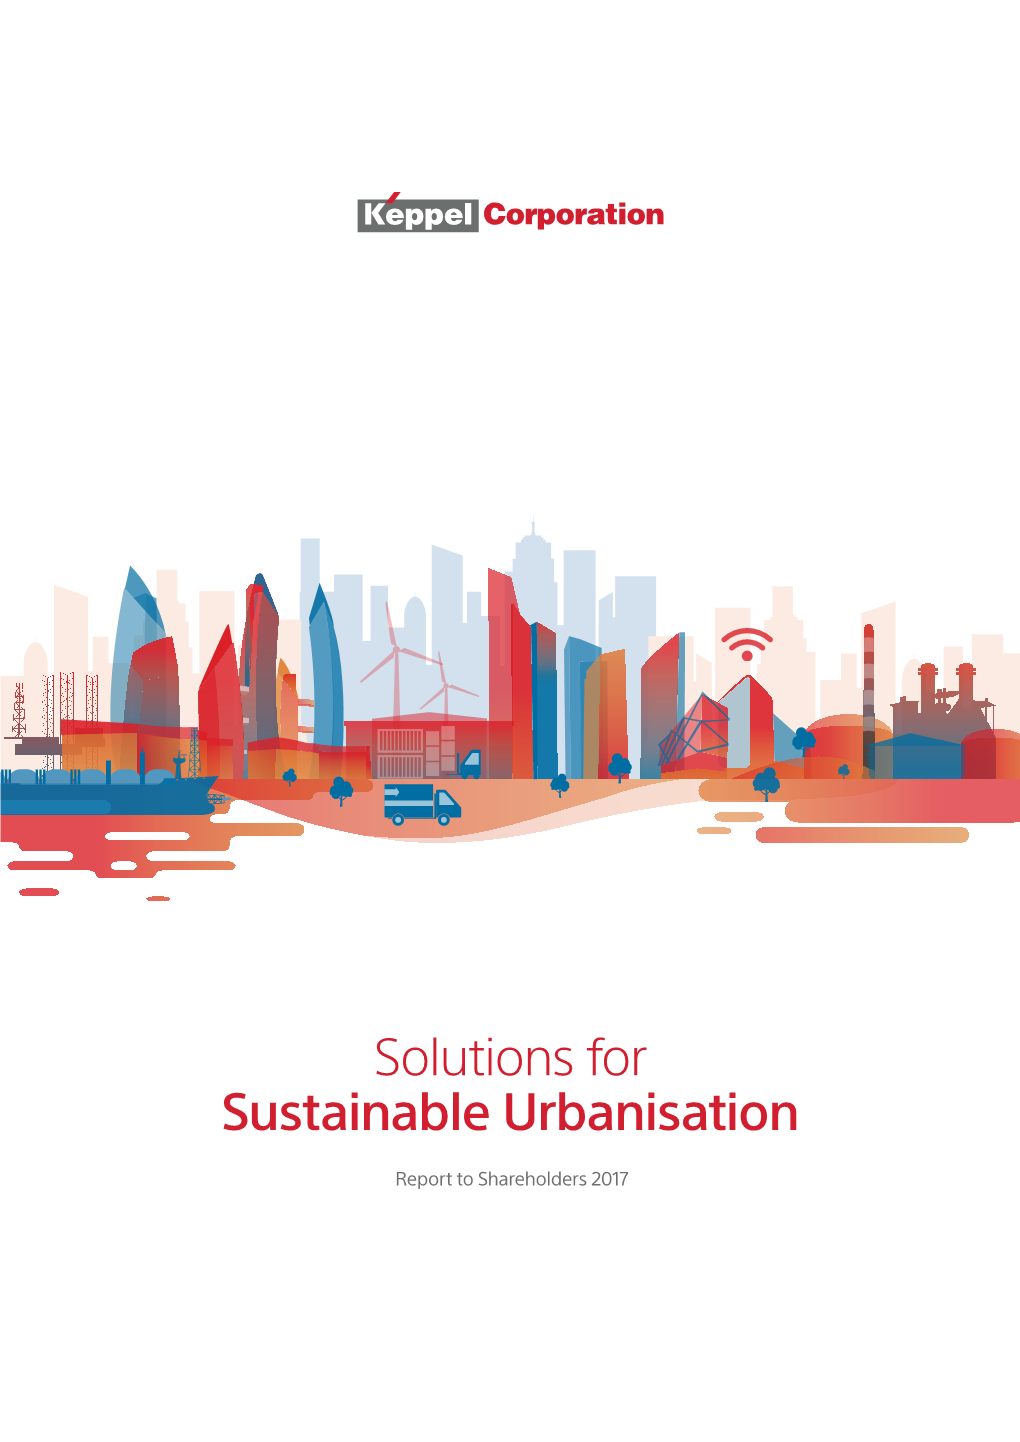 Solutions for Sustainable Urbanisation